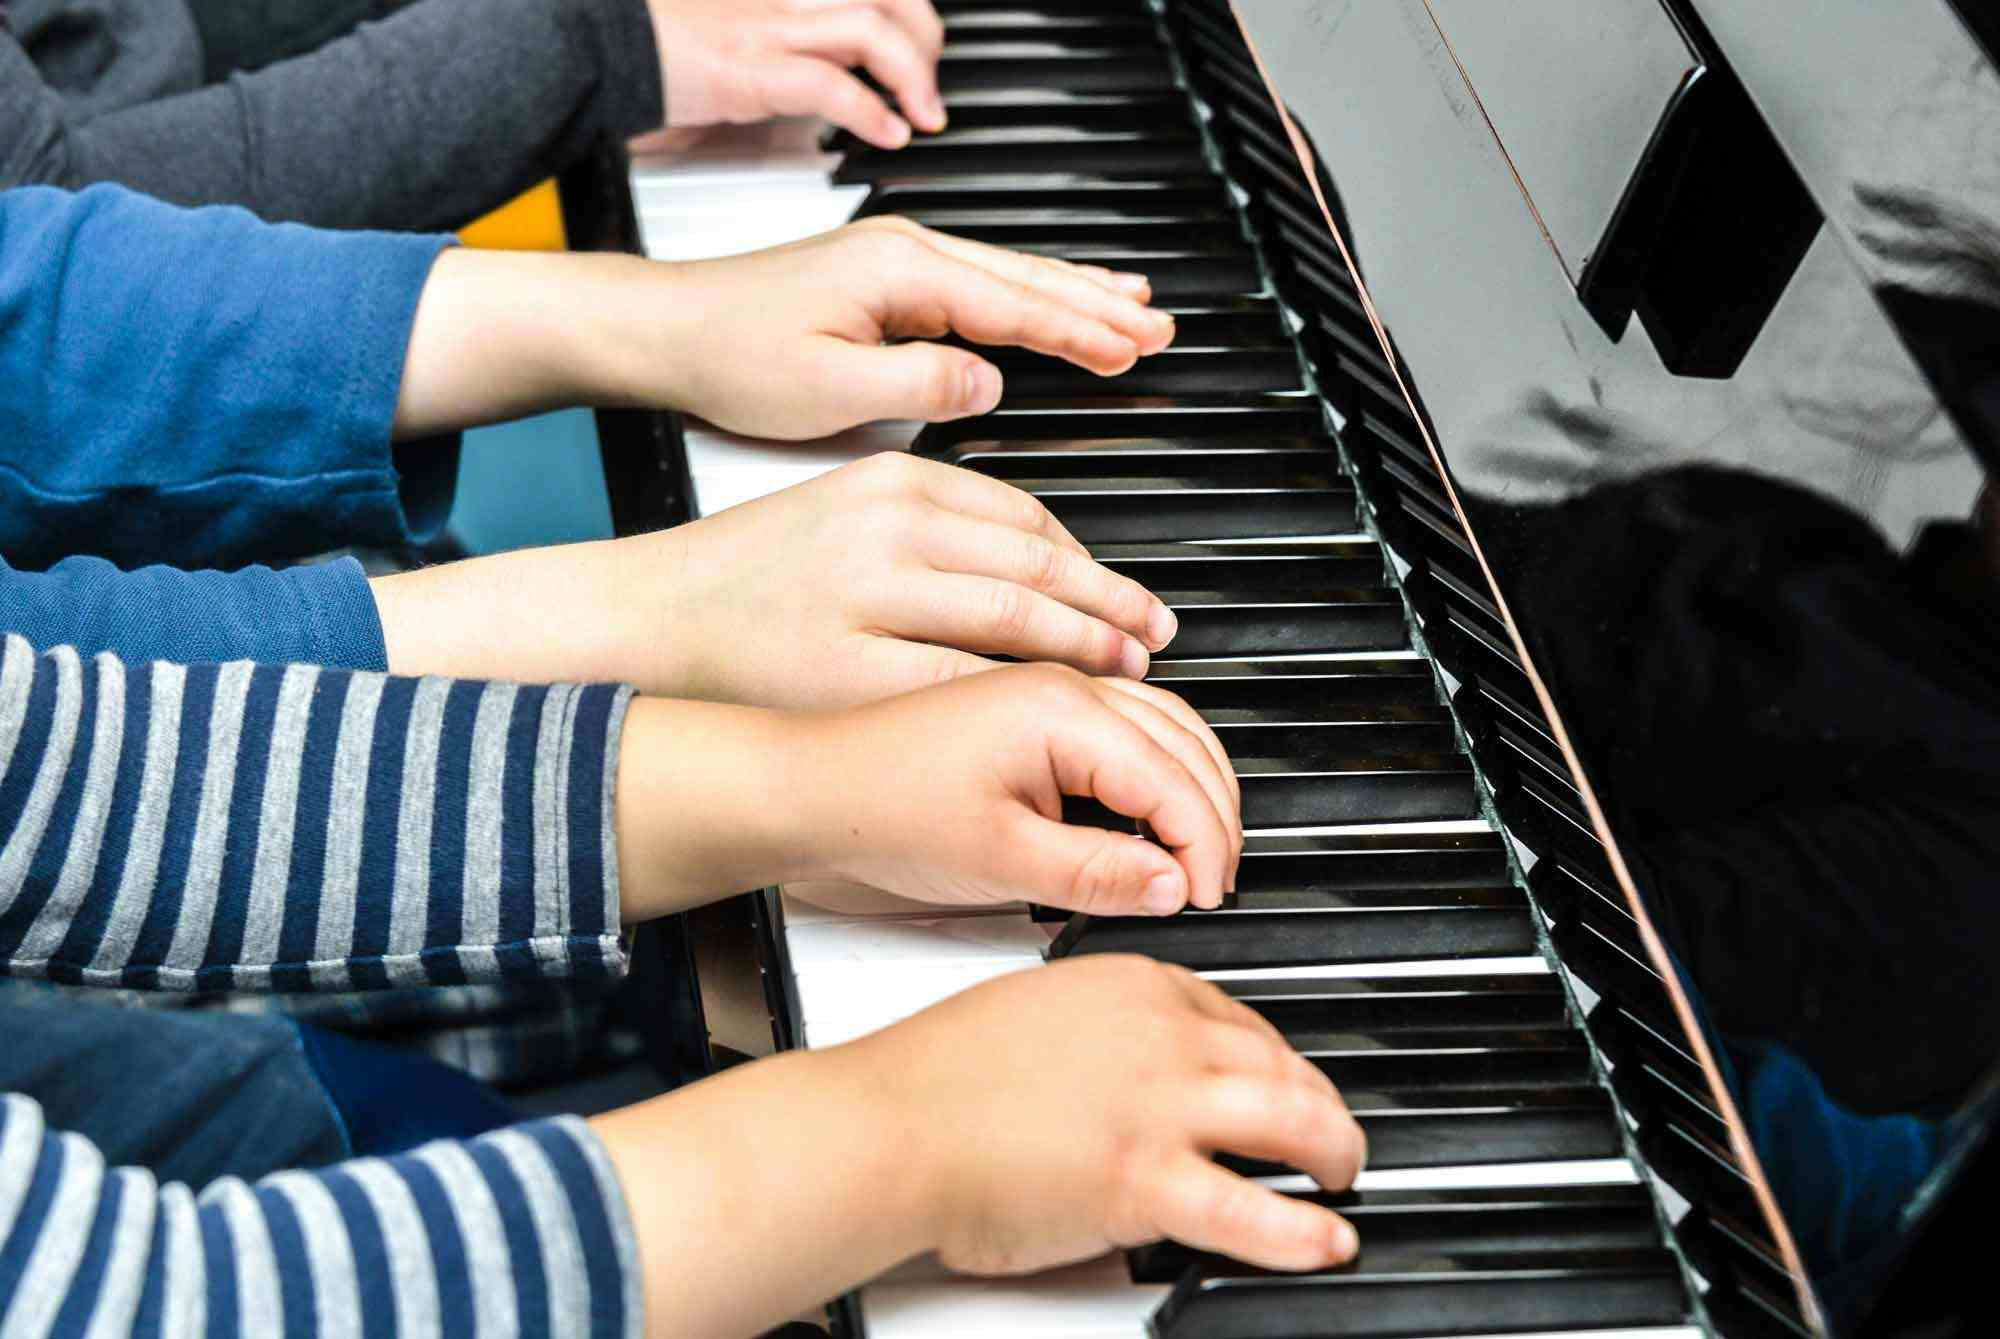 Several children hands on a piano having a music lesson